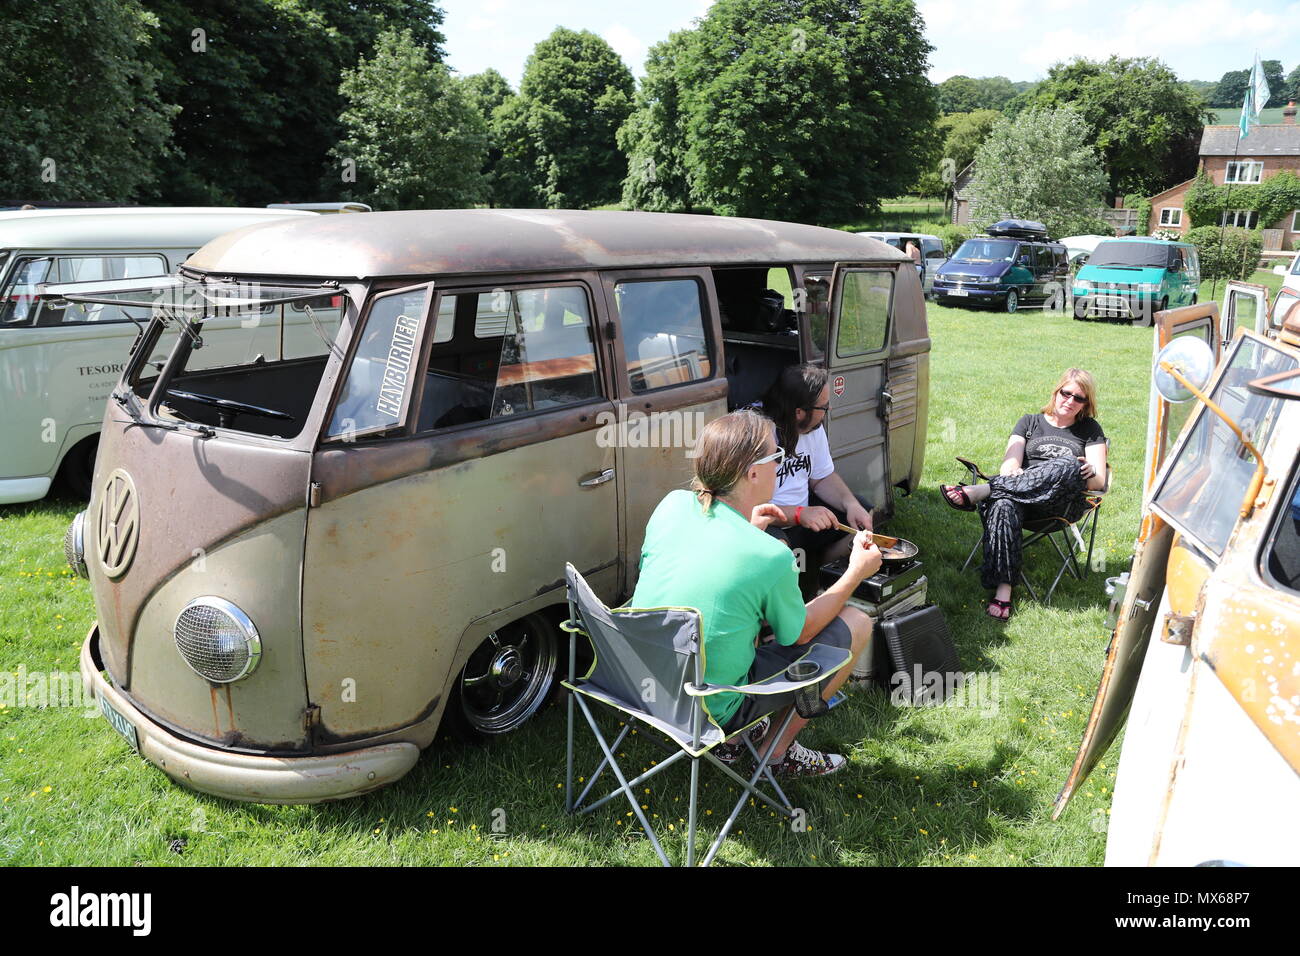 Stonor, Oxfordshire, UK. 3rd Jun, 2018. All types of historic Volkswagen cars and vans were displayed at this years's gathering of their owners. Fans could get close to well-loved vehicles from the German car manufacturer, which created its reputation for durability  and Hippie appeal in the 60s. Credit: Uwe Deffner/Alamy Live News Stock Photo